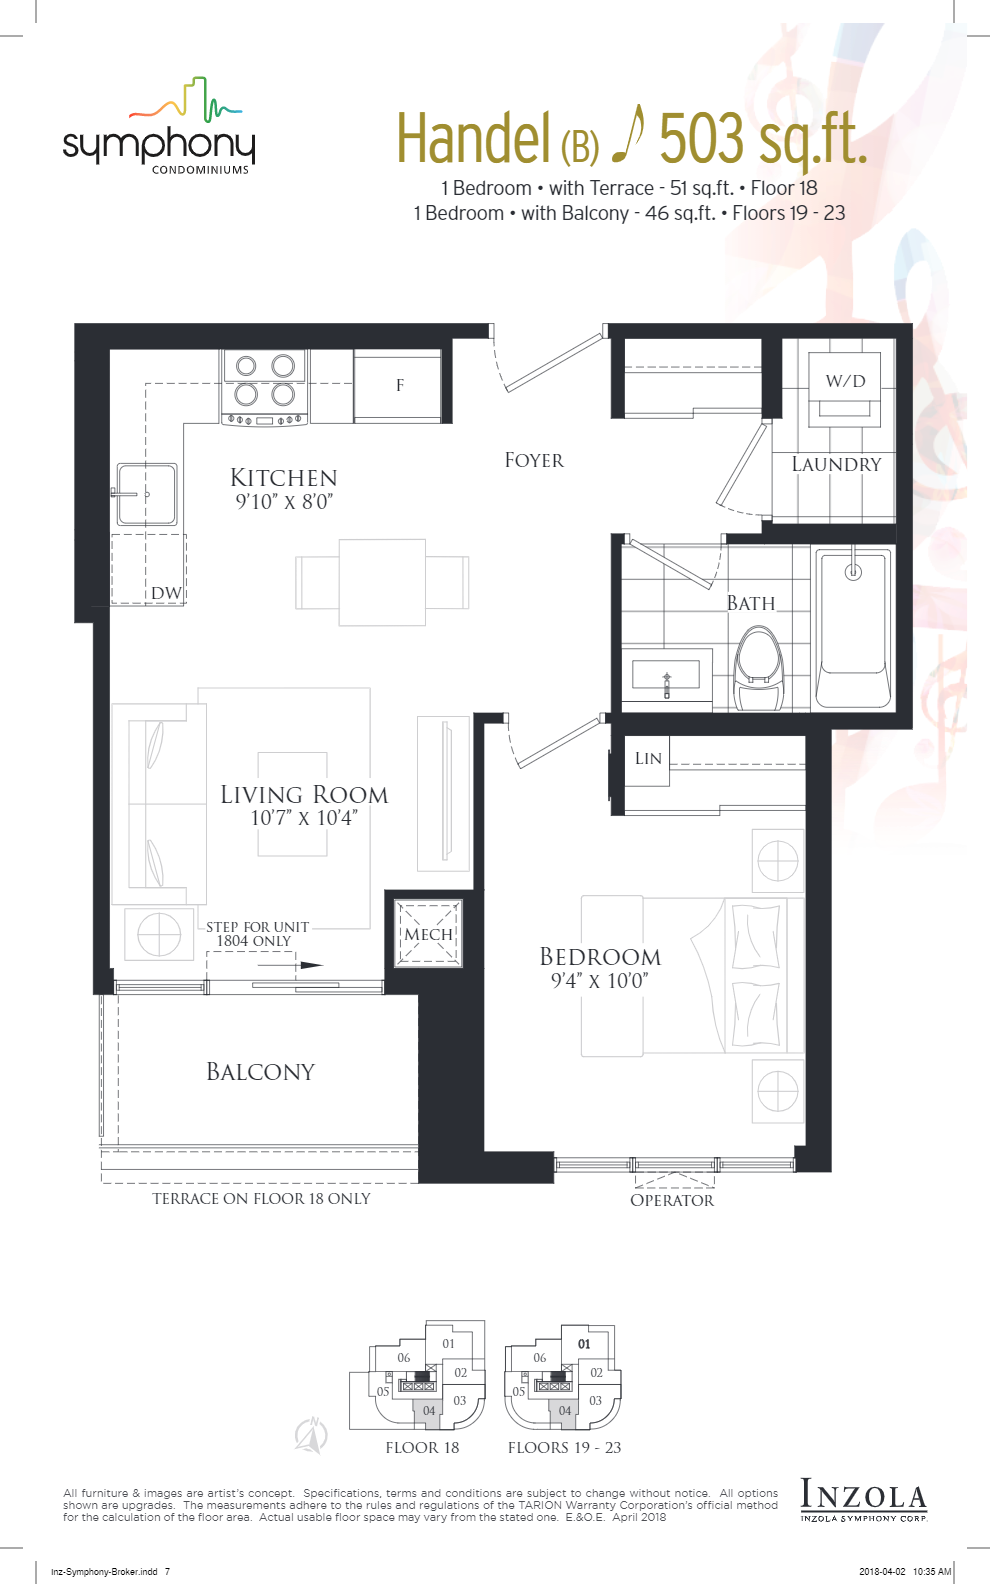  Floor Plan of Symphony Condos with undefined beds